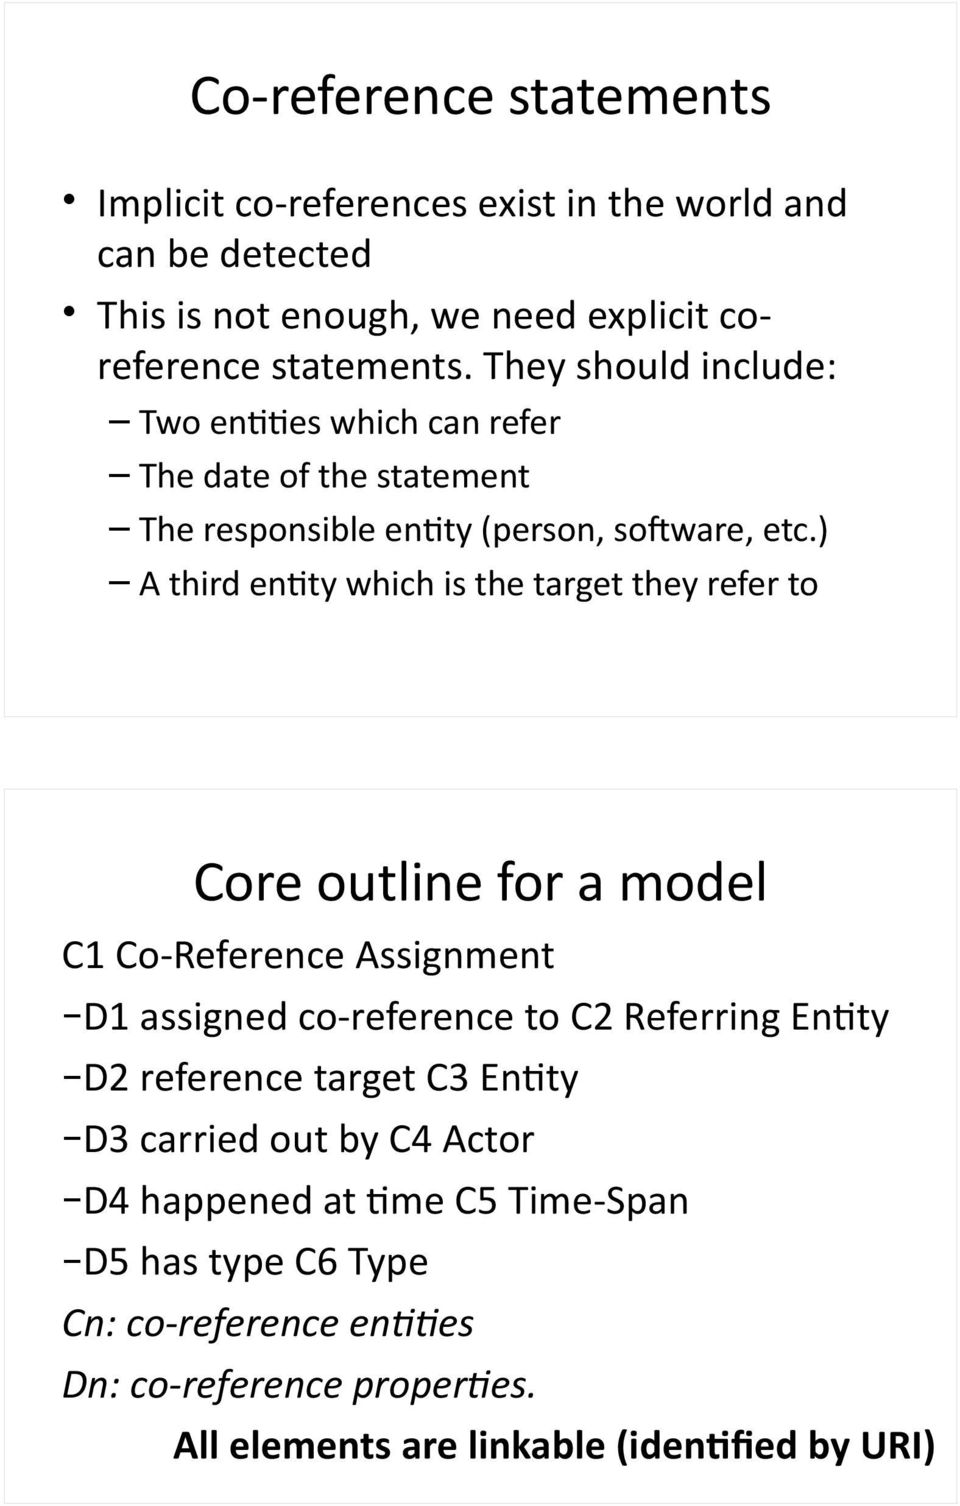 ) A third enfty which is the target they refer to Core outline for a model C1 Co- Reference Assignment D1 assigned co- reference to C2 Referring EnFty D2